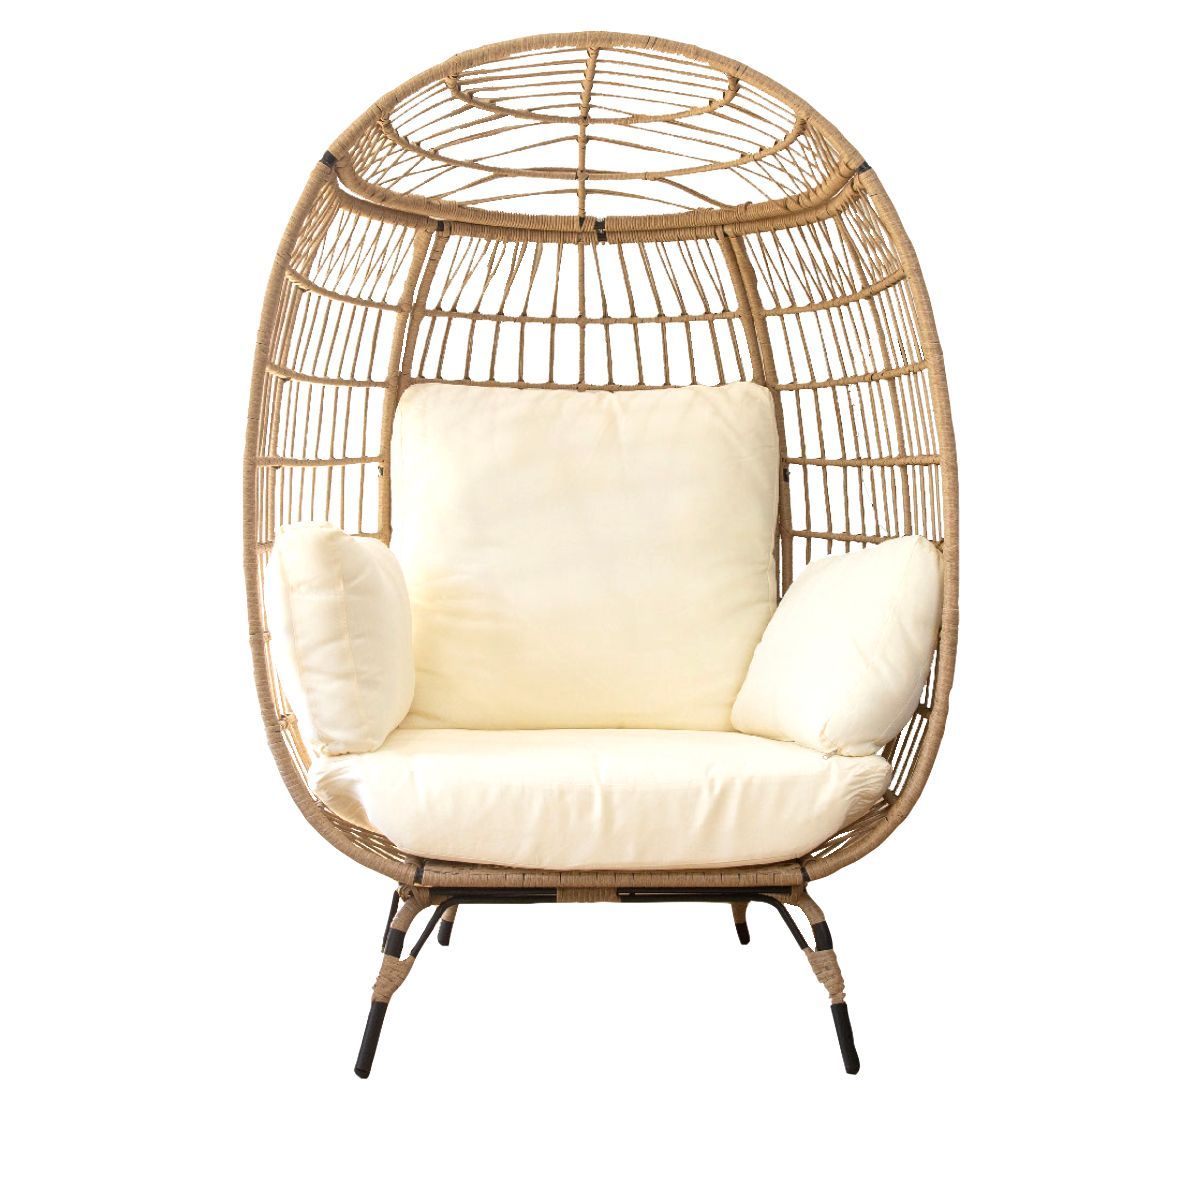 Barton Oversized Wicker Egg Chair Indoor/Outdoor Patio Lounger With Seat Cushion, Beige/White | Target